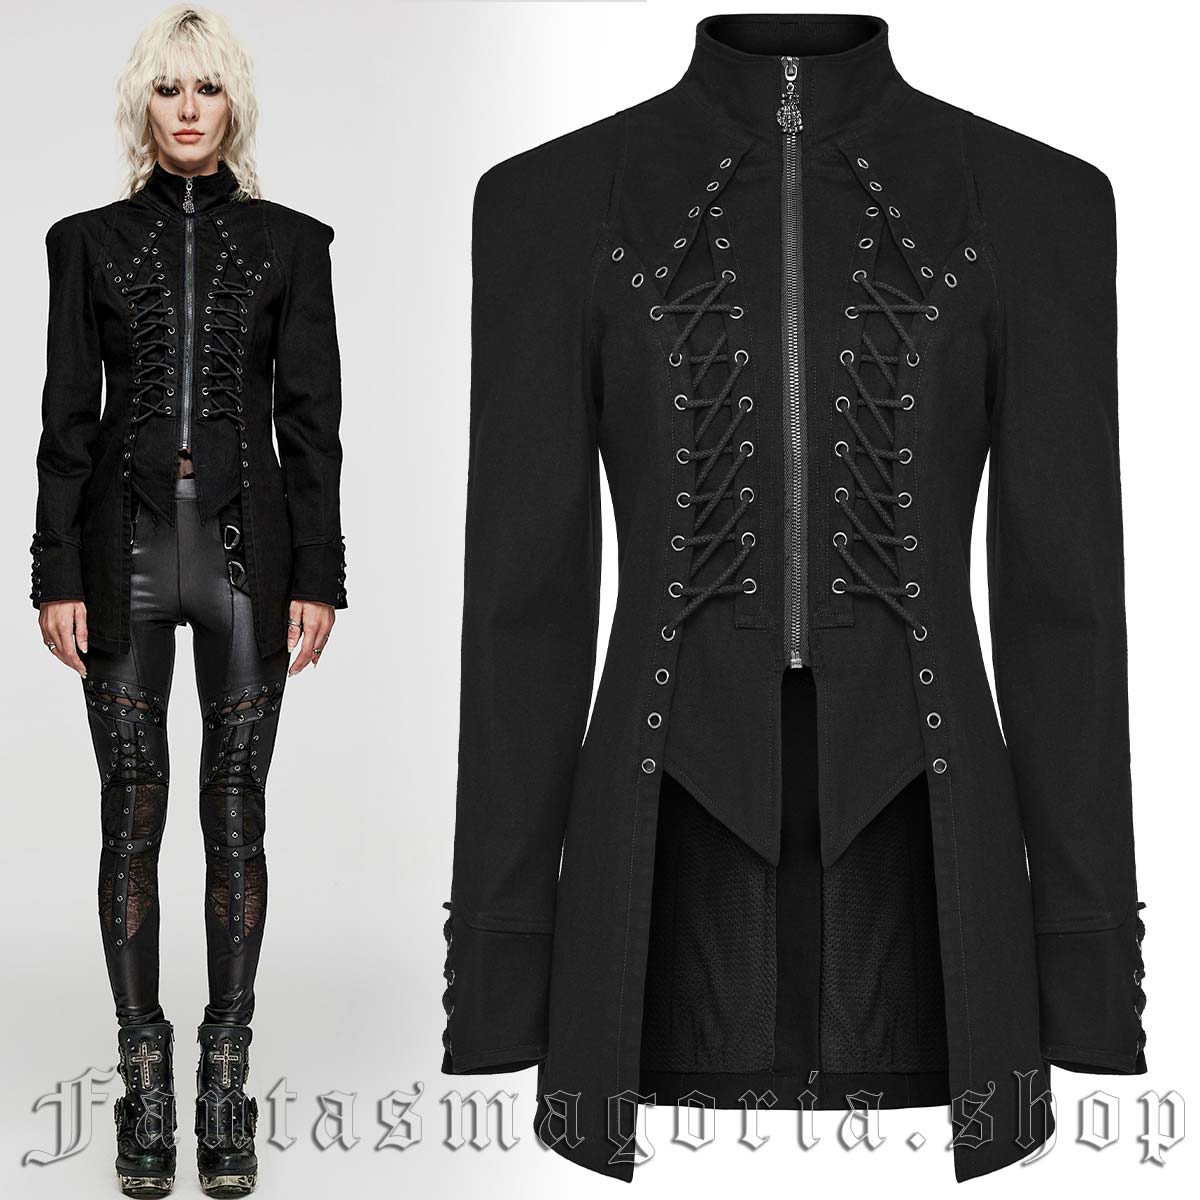 Women's Gothic black fitted short lace-up detailing zip-up jacket. - Punk Rave - WY-1520/BK